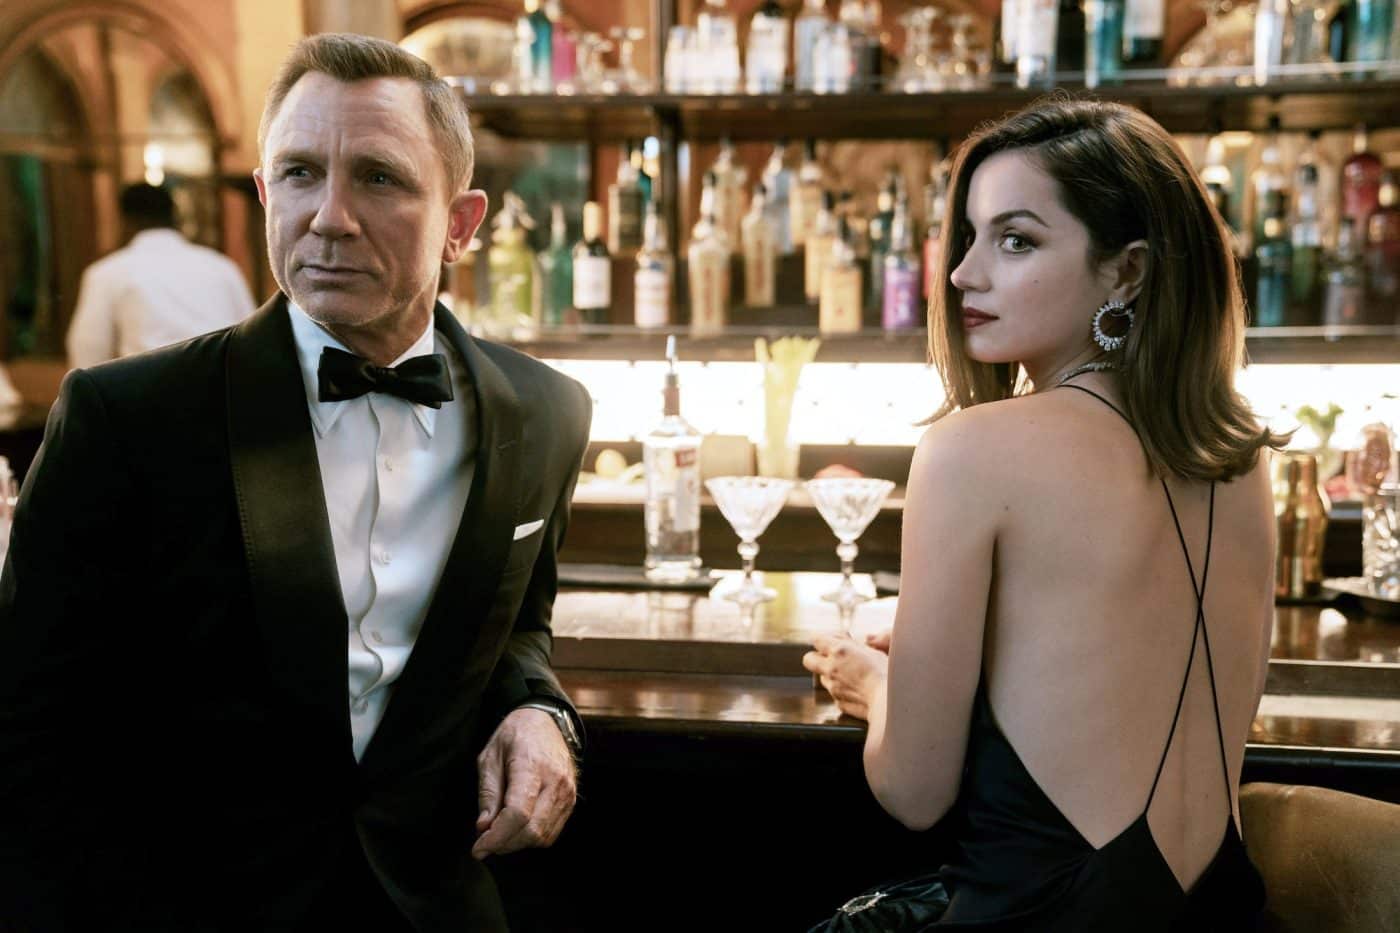 In this fall's No Time to Die, Daniel Craig's Bond pairs his tuxedo with an OMEGA SEAMASTER and a martini in a scene with Ana de Armas.